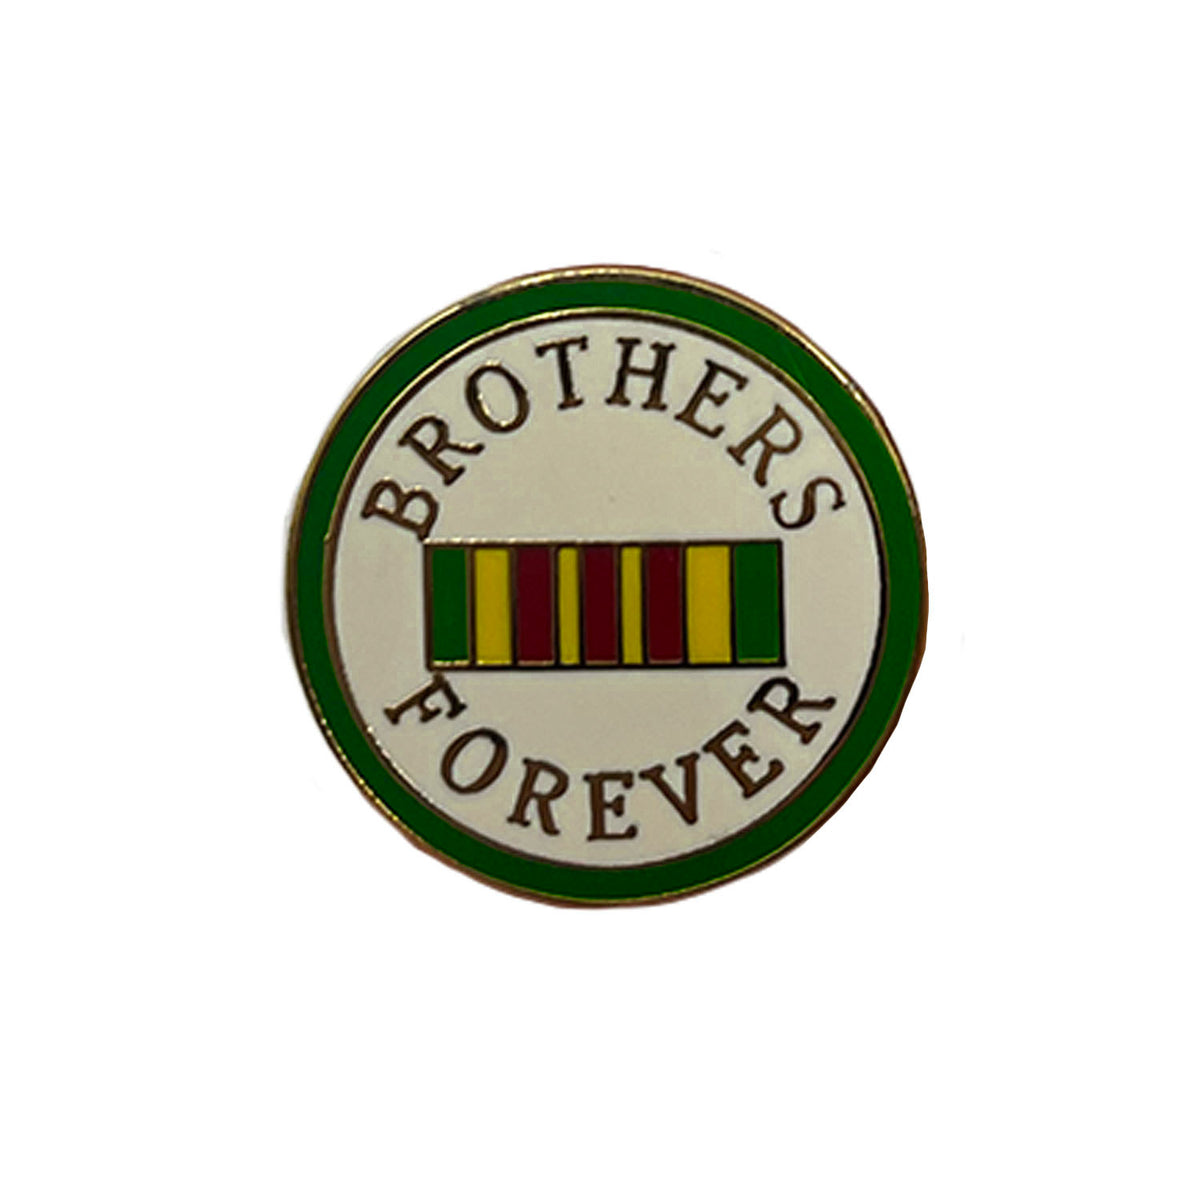 Brothers Forever Metal Pin